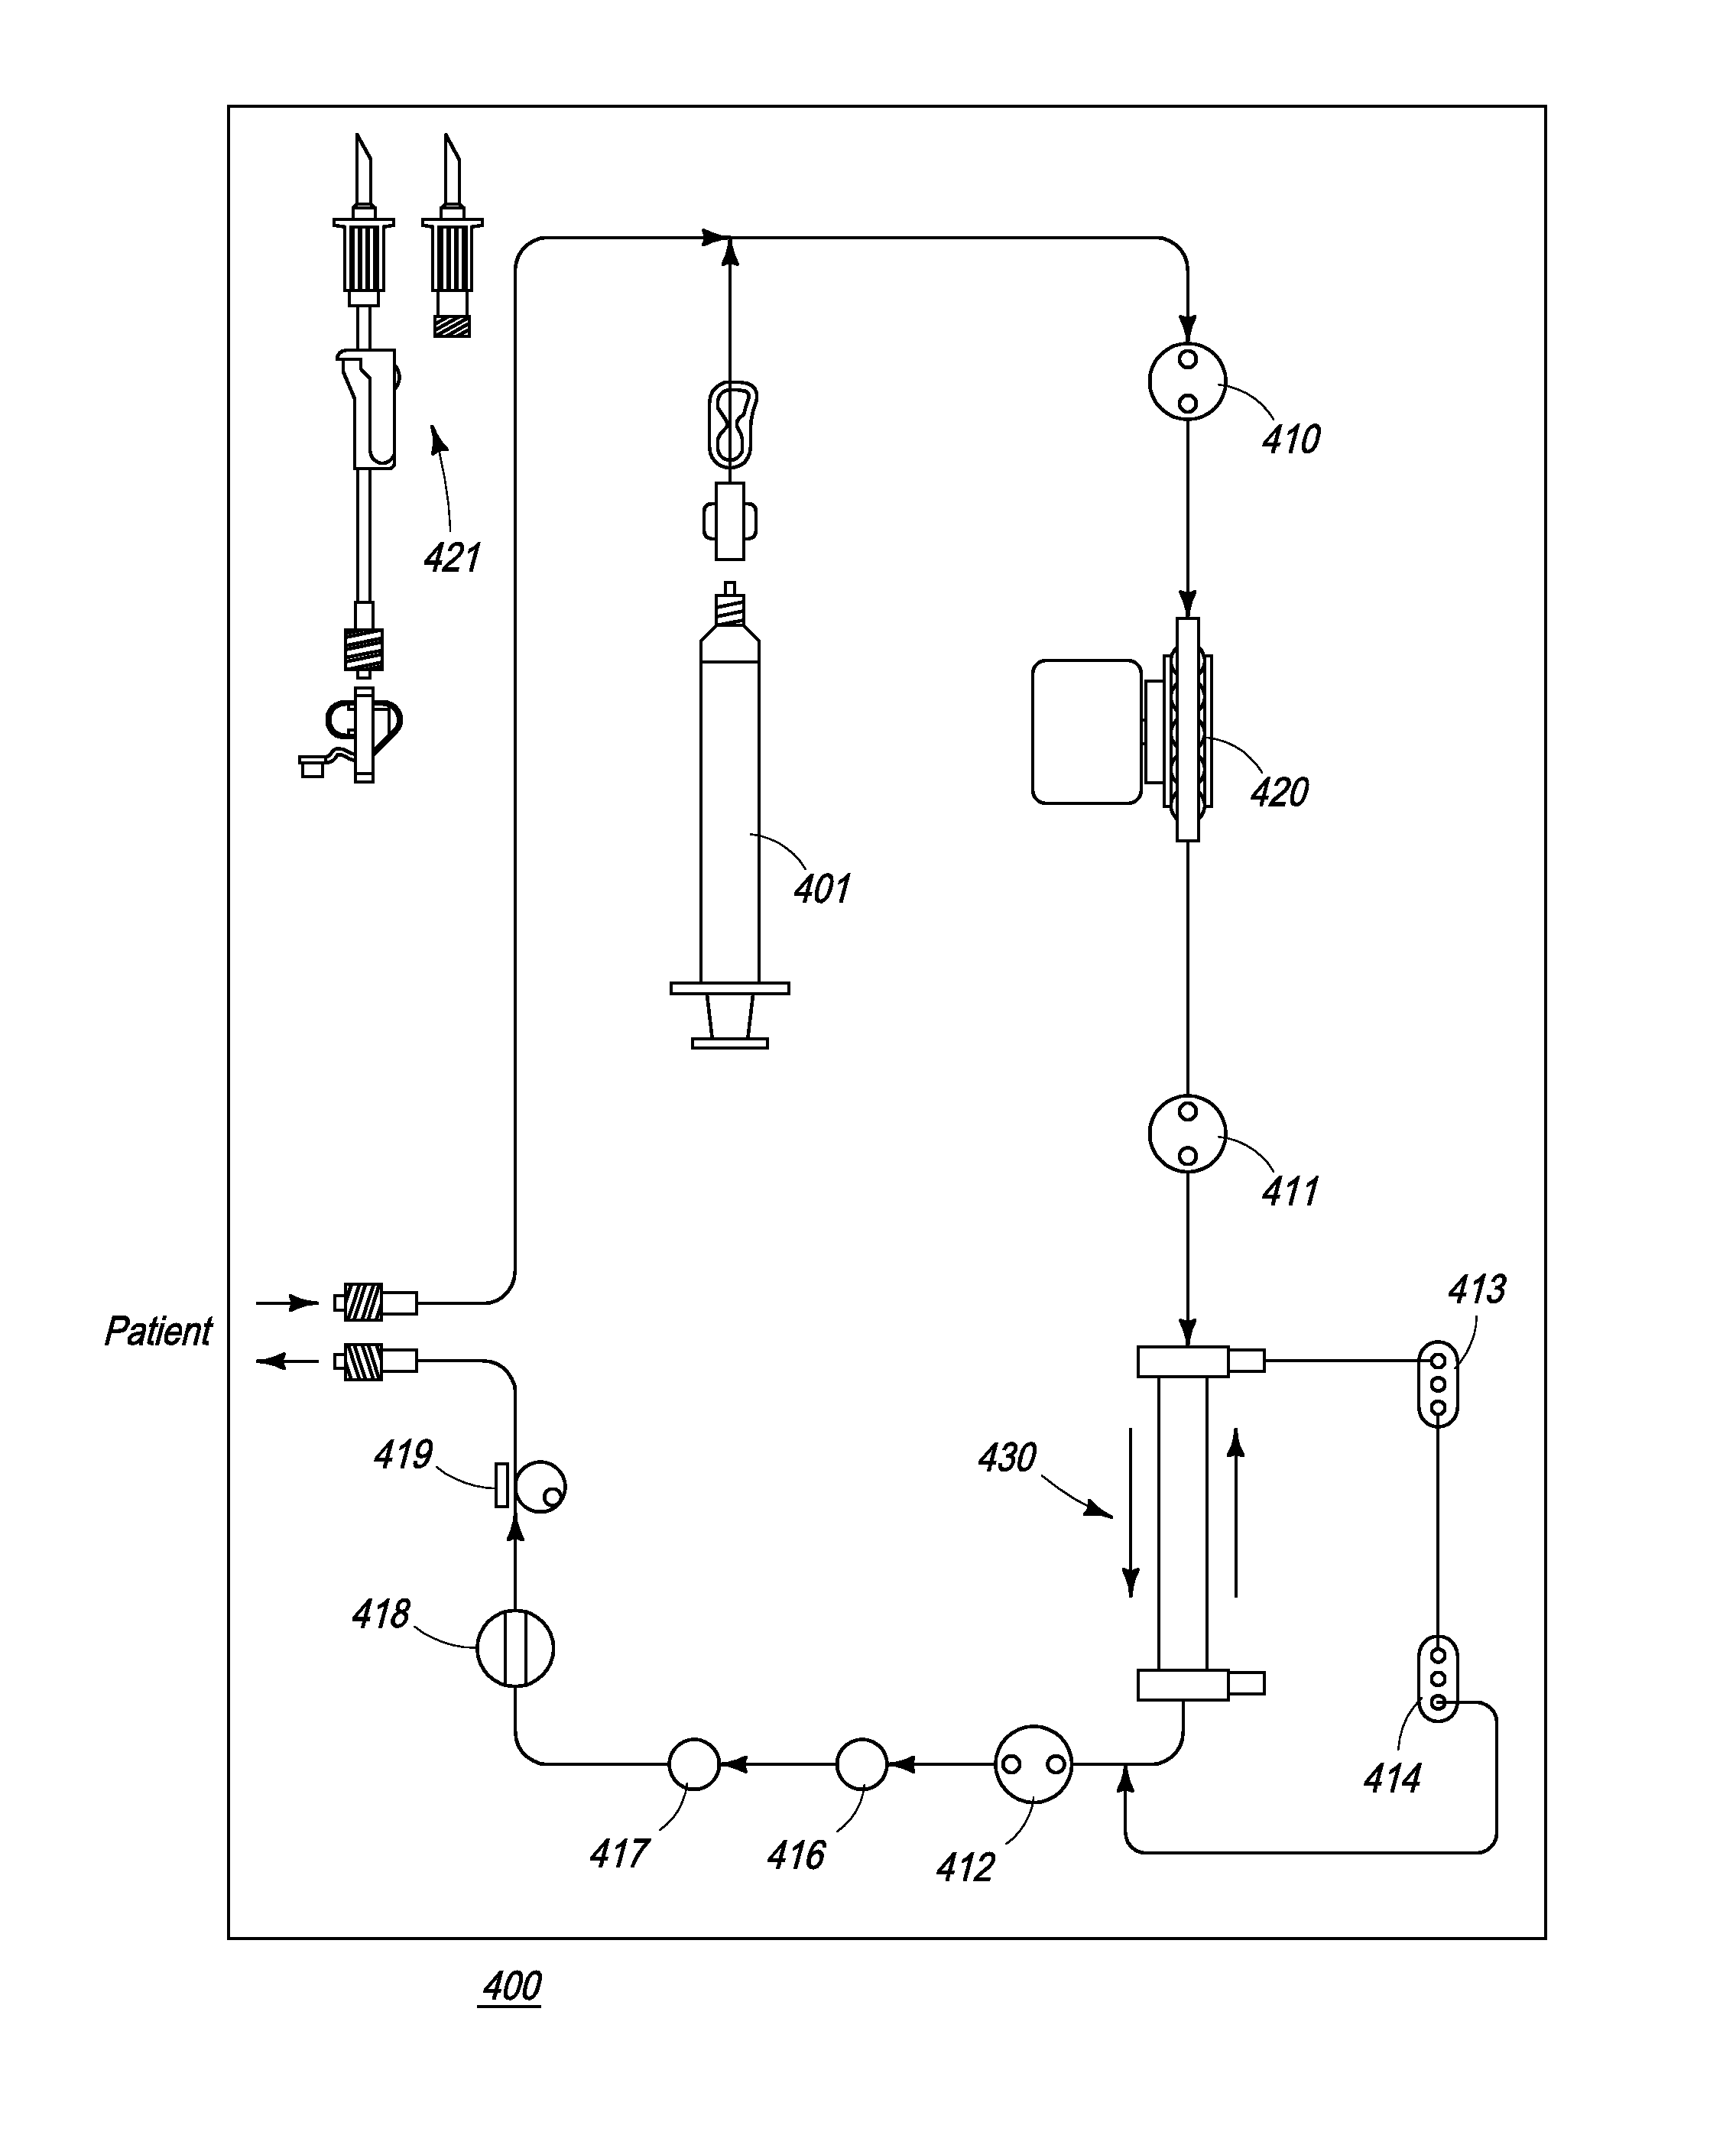 Method and Systems for Controlling Ultrafiltration Using Central Venous Pressure Measurements